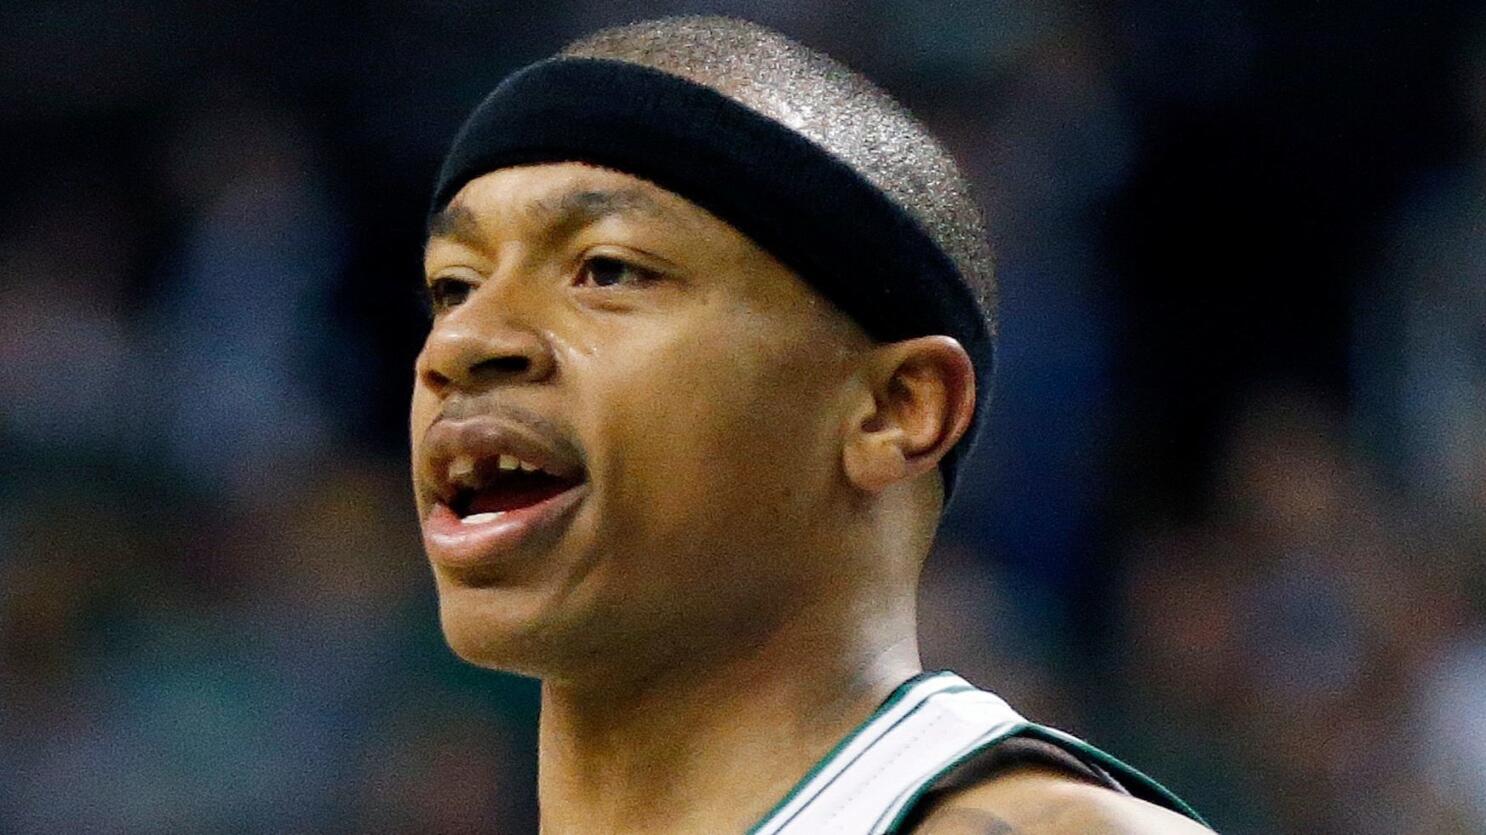 Missing a tooth, Isaiah Thomas has significant dental work - The Boston  Globe